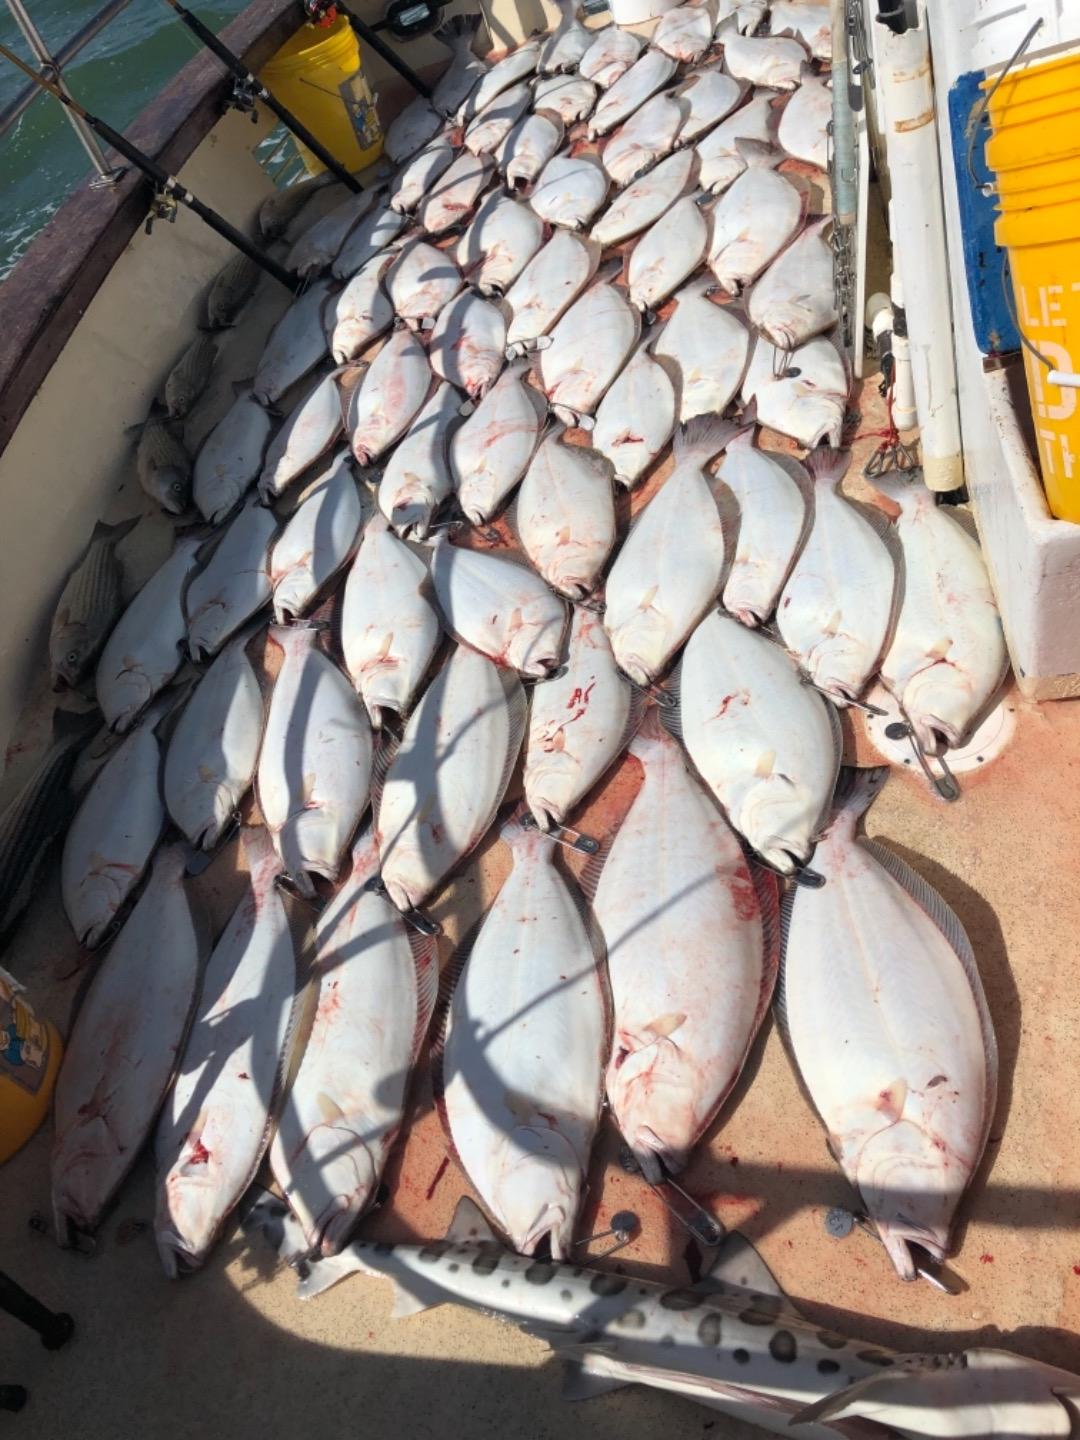 Great halibut action 